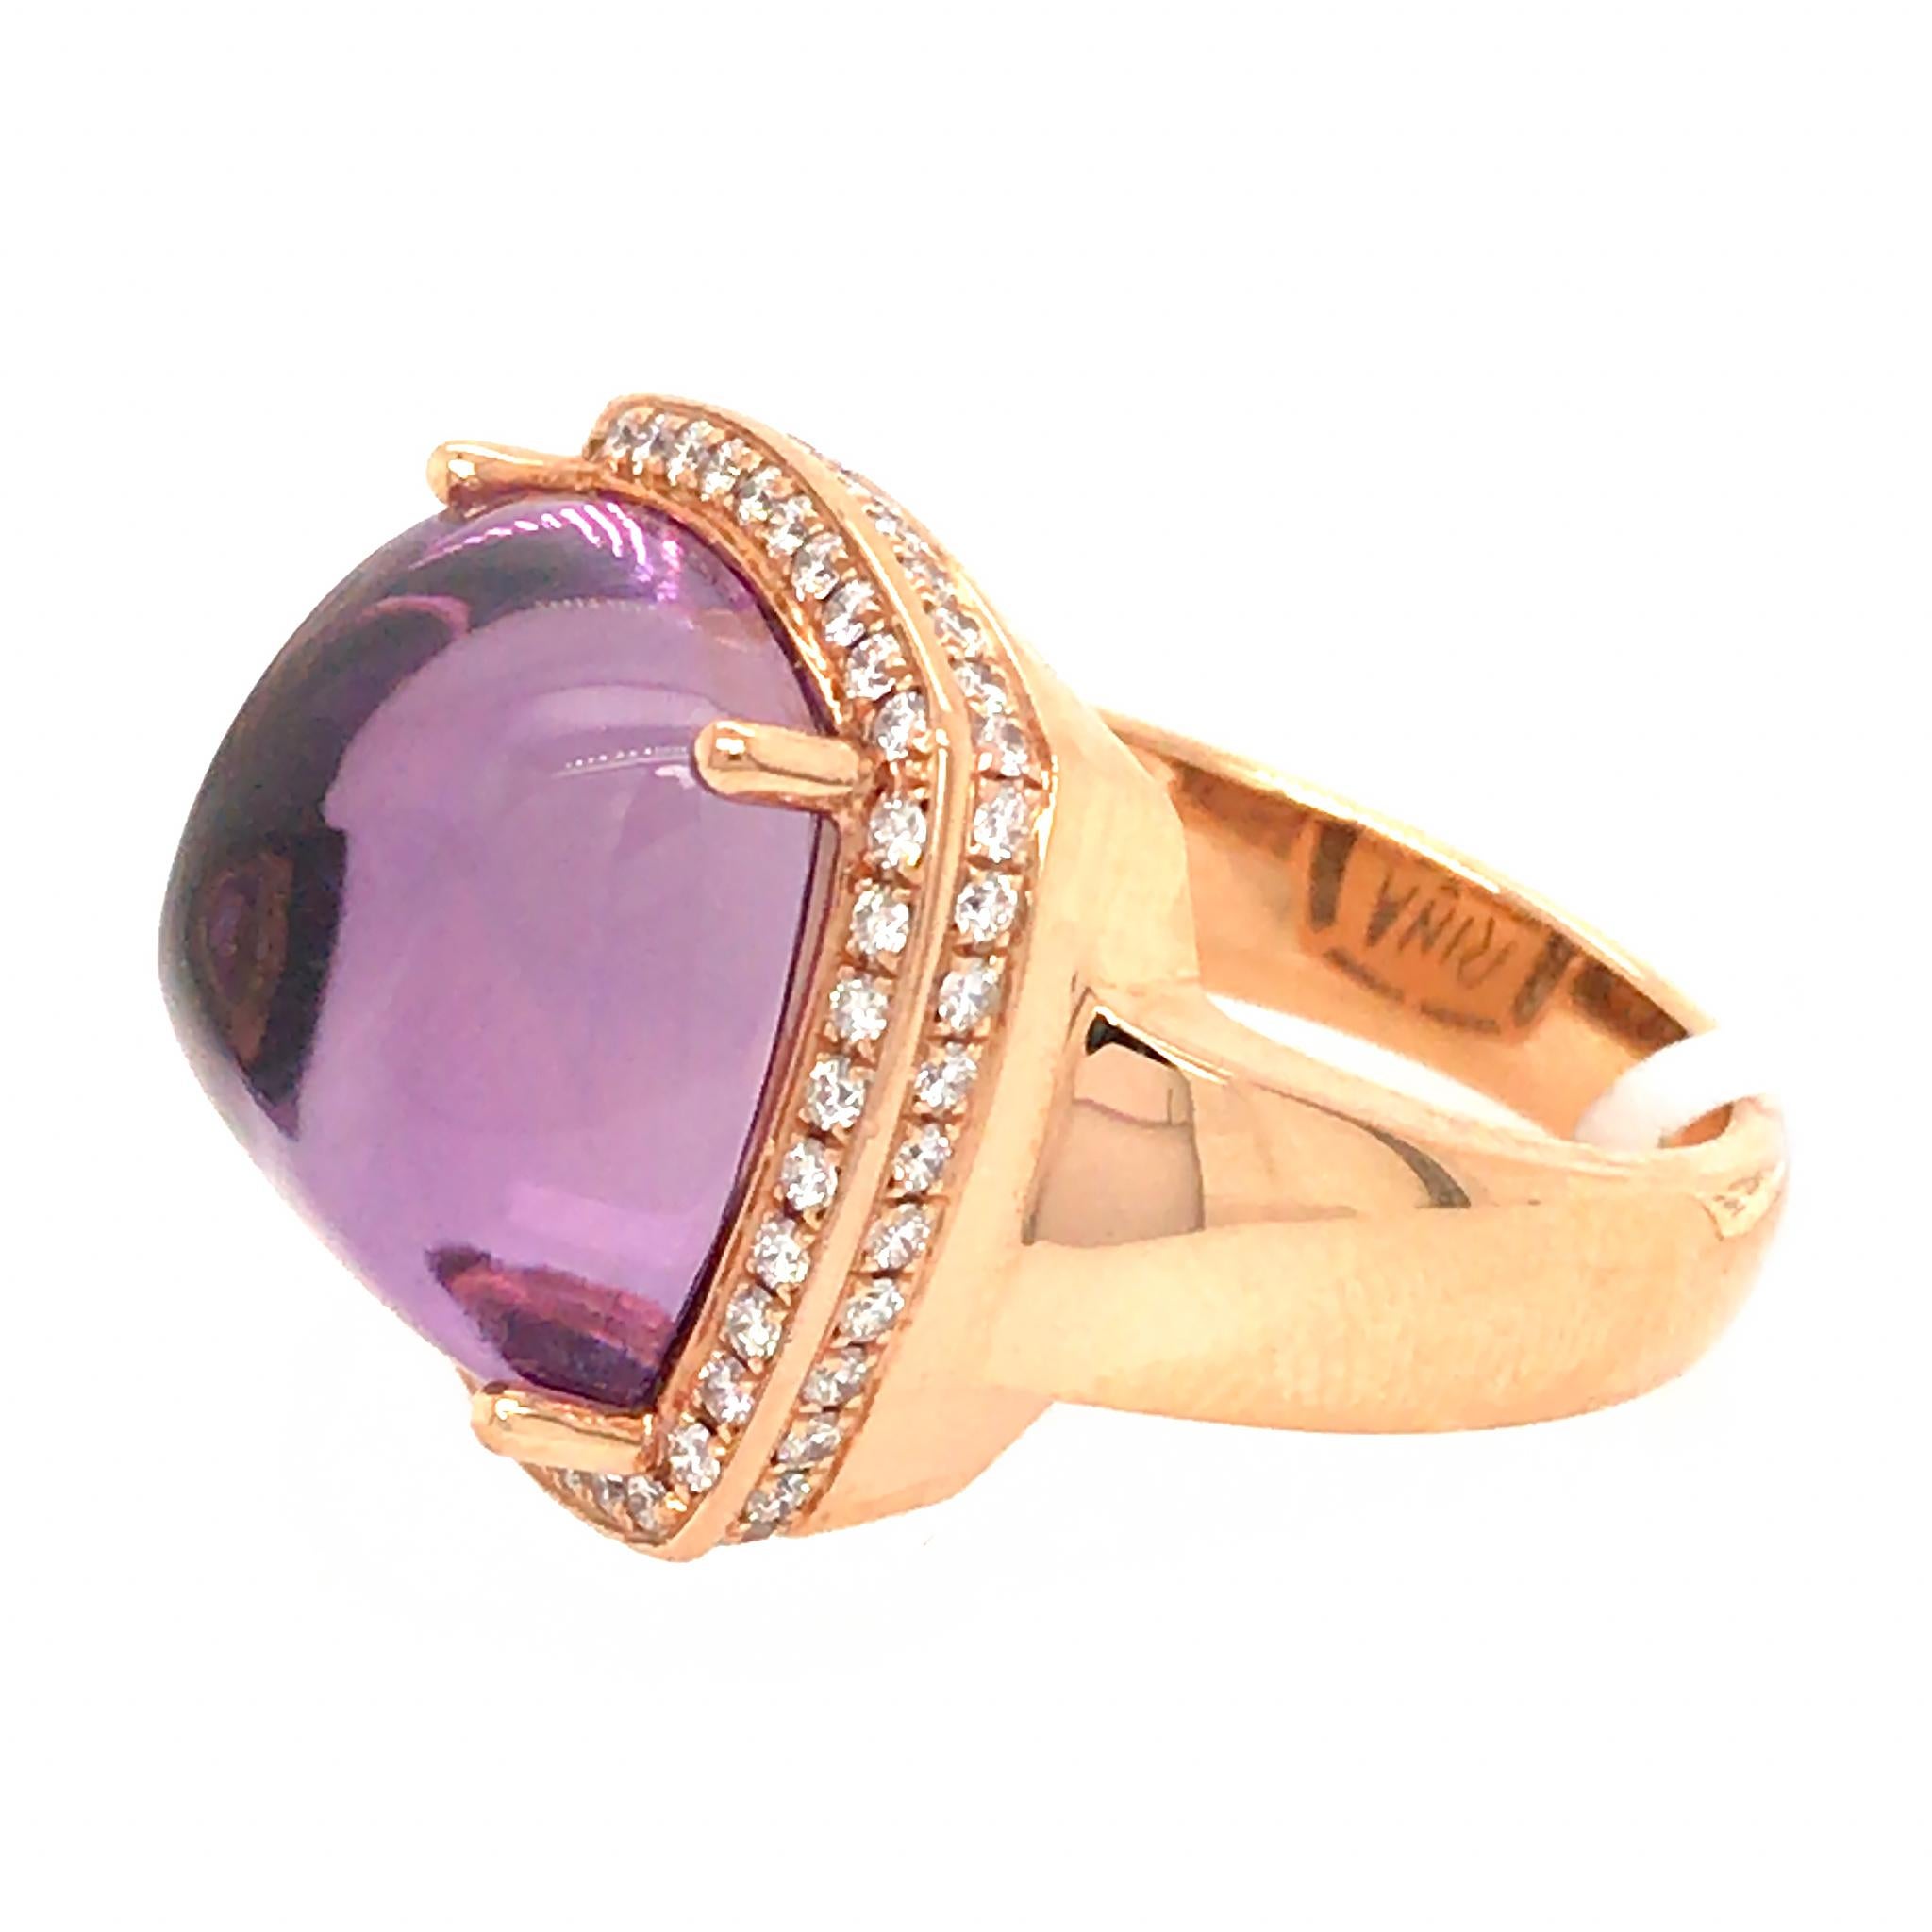 Women's 18k Rose Gold Cabochon Amethyst and Diamond Ring